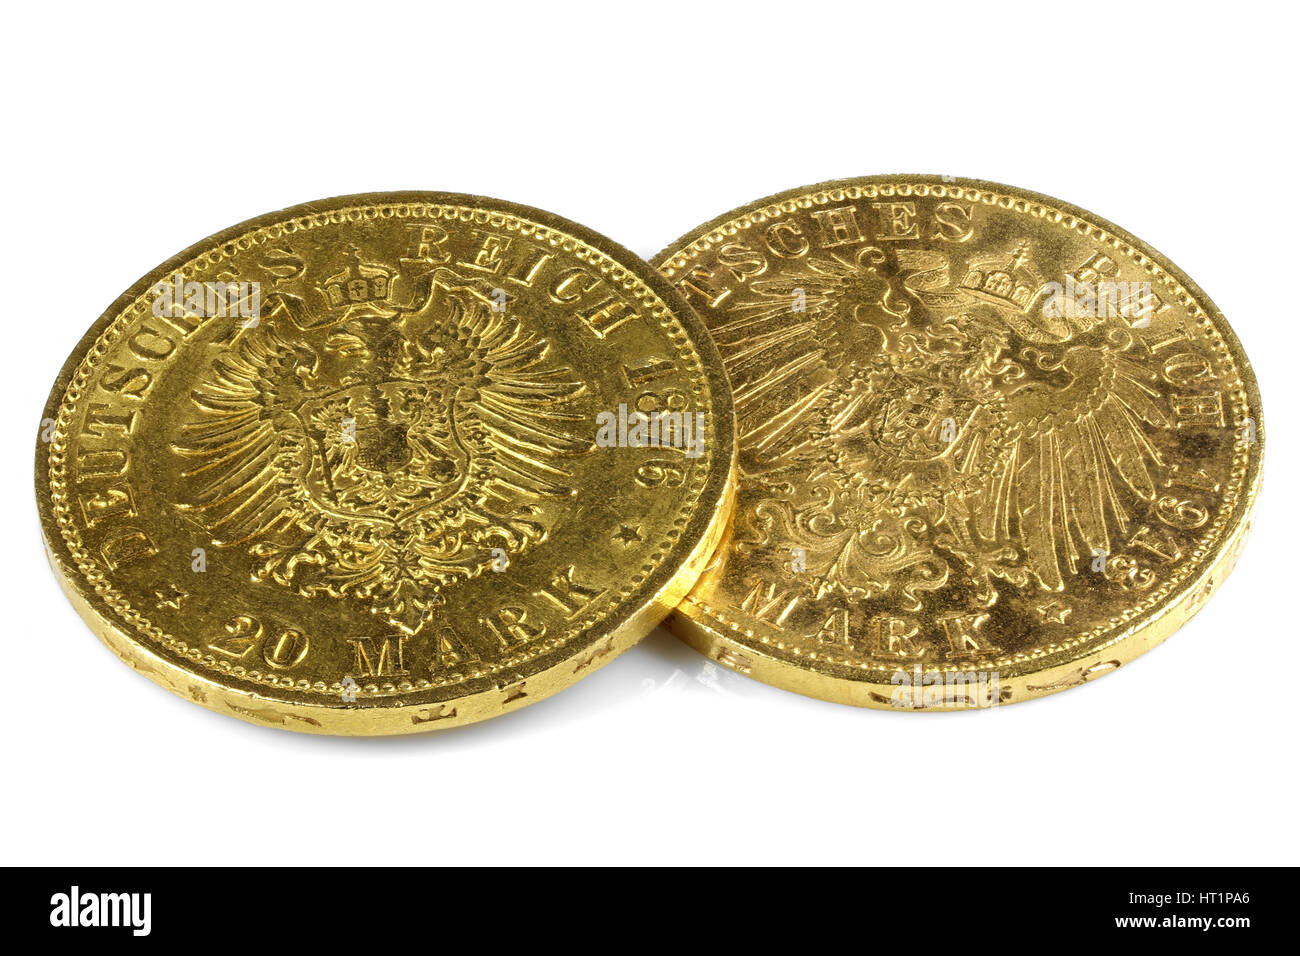 Hamburg gold coins (German Empire Goldmark) with older and younger type of Eagle isolated on white background Stock Photo